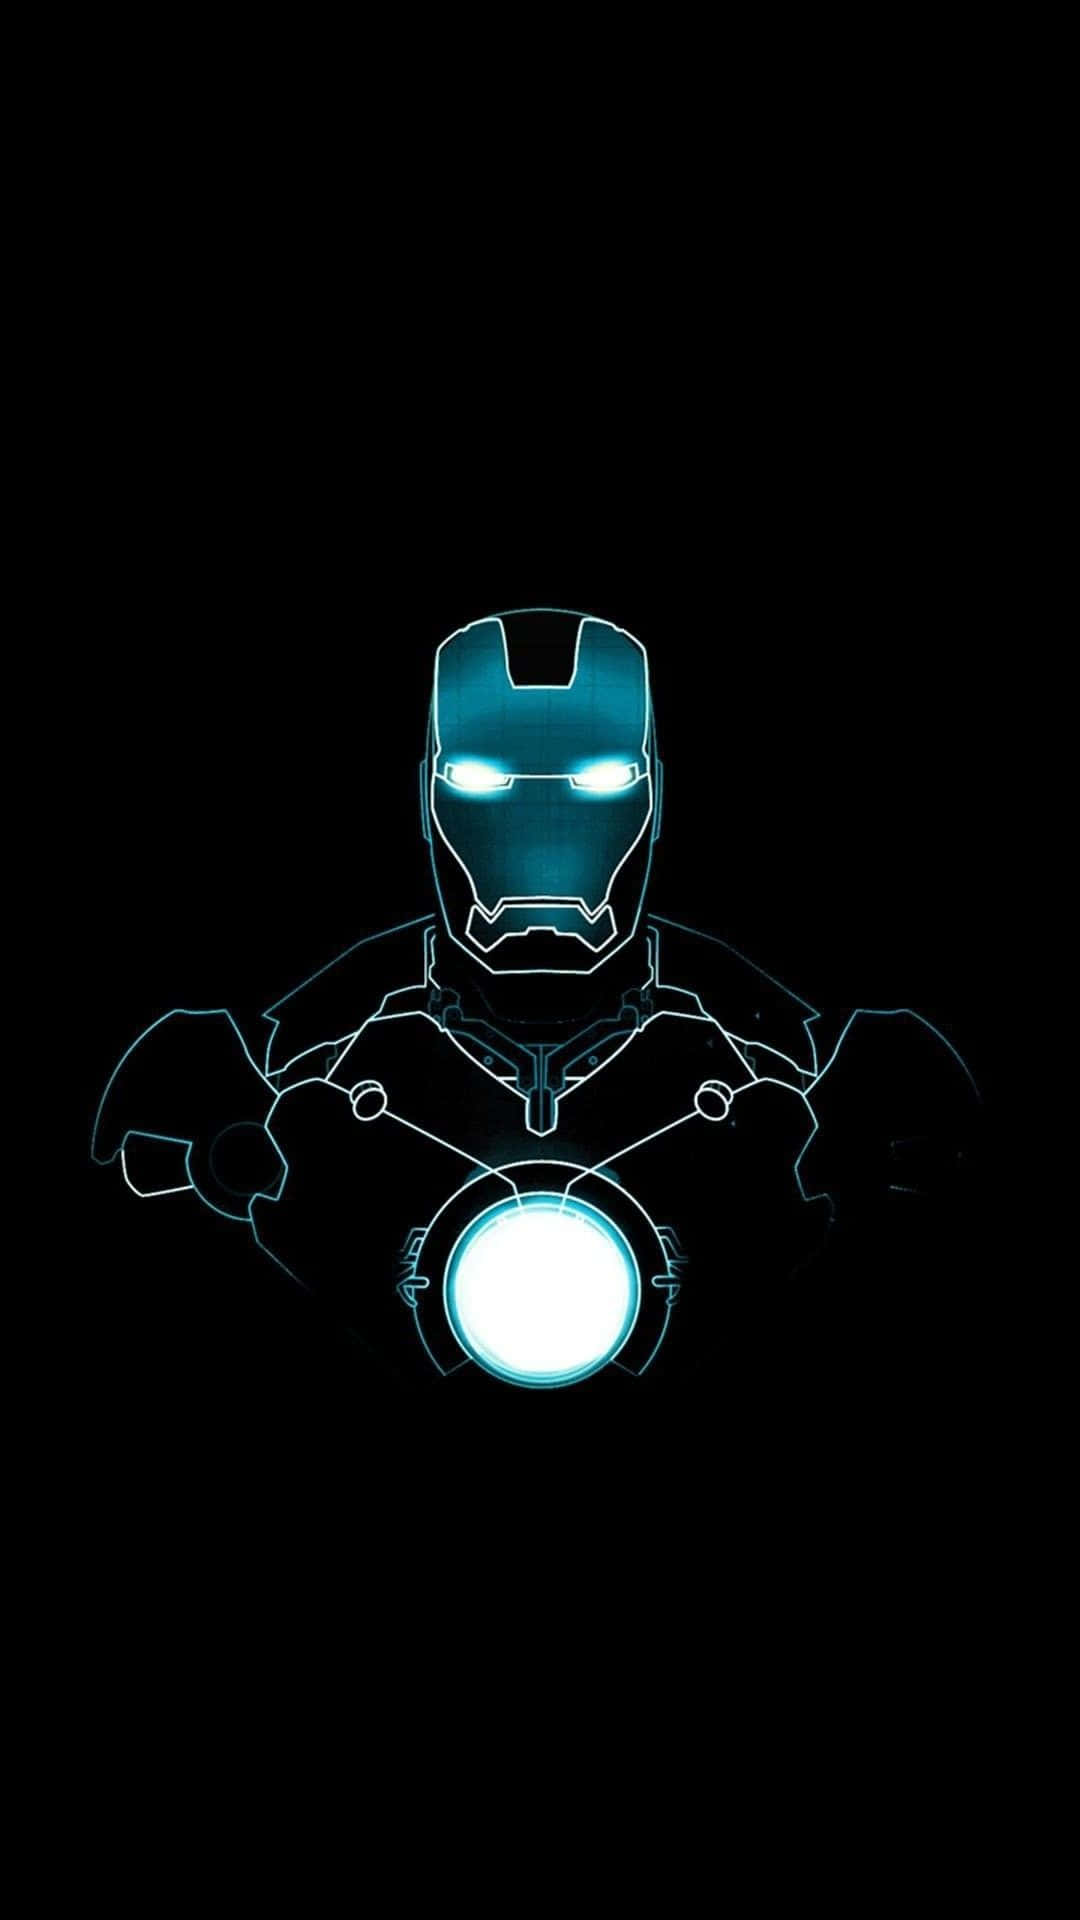 Experience Superhero Power with the Iron Man iPhone X Wallpaper